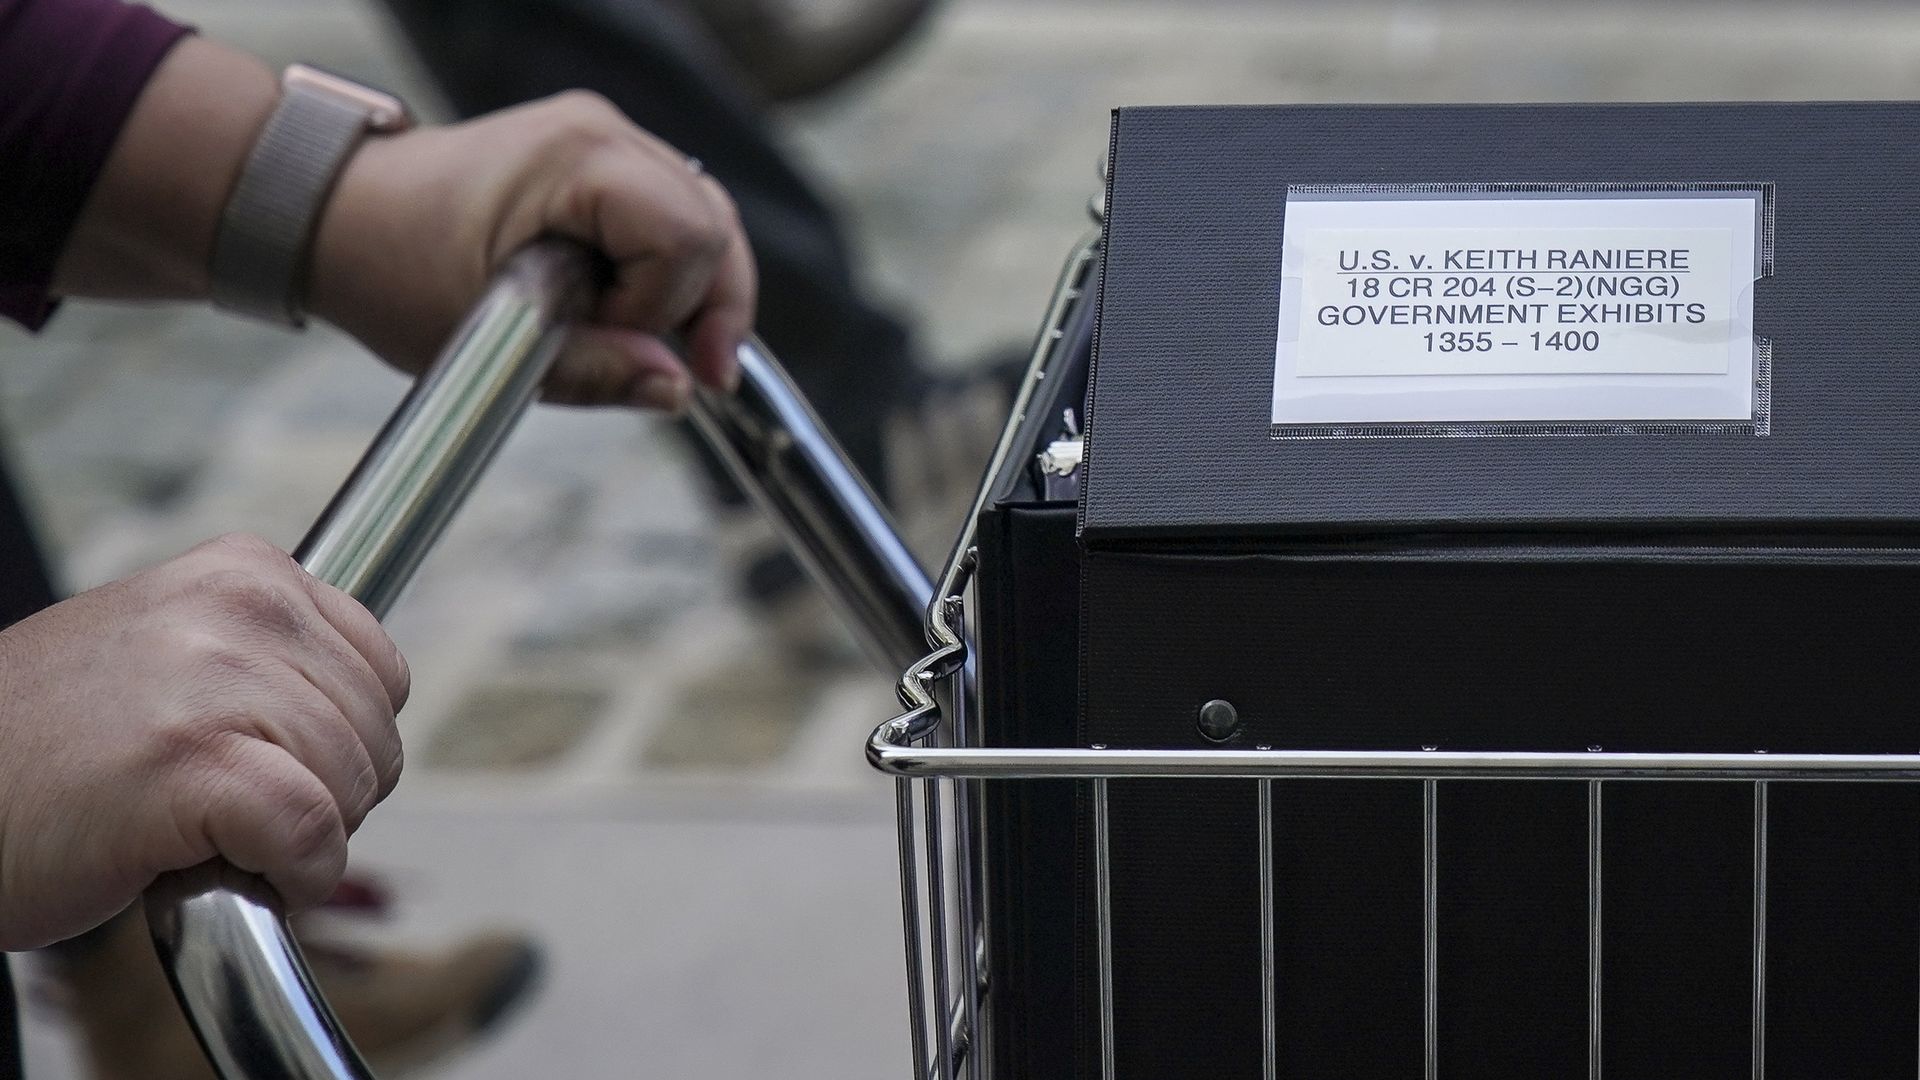 Photo of a person pushing a cart with a black box containing court documents related to Keith Raniere